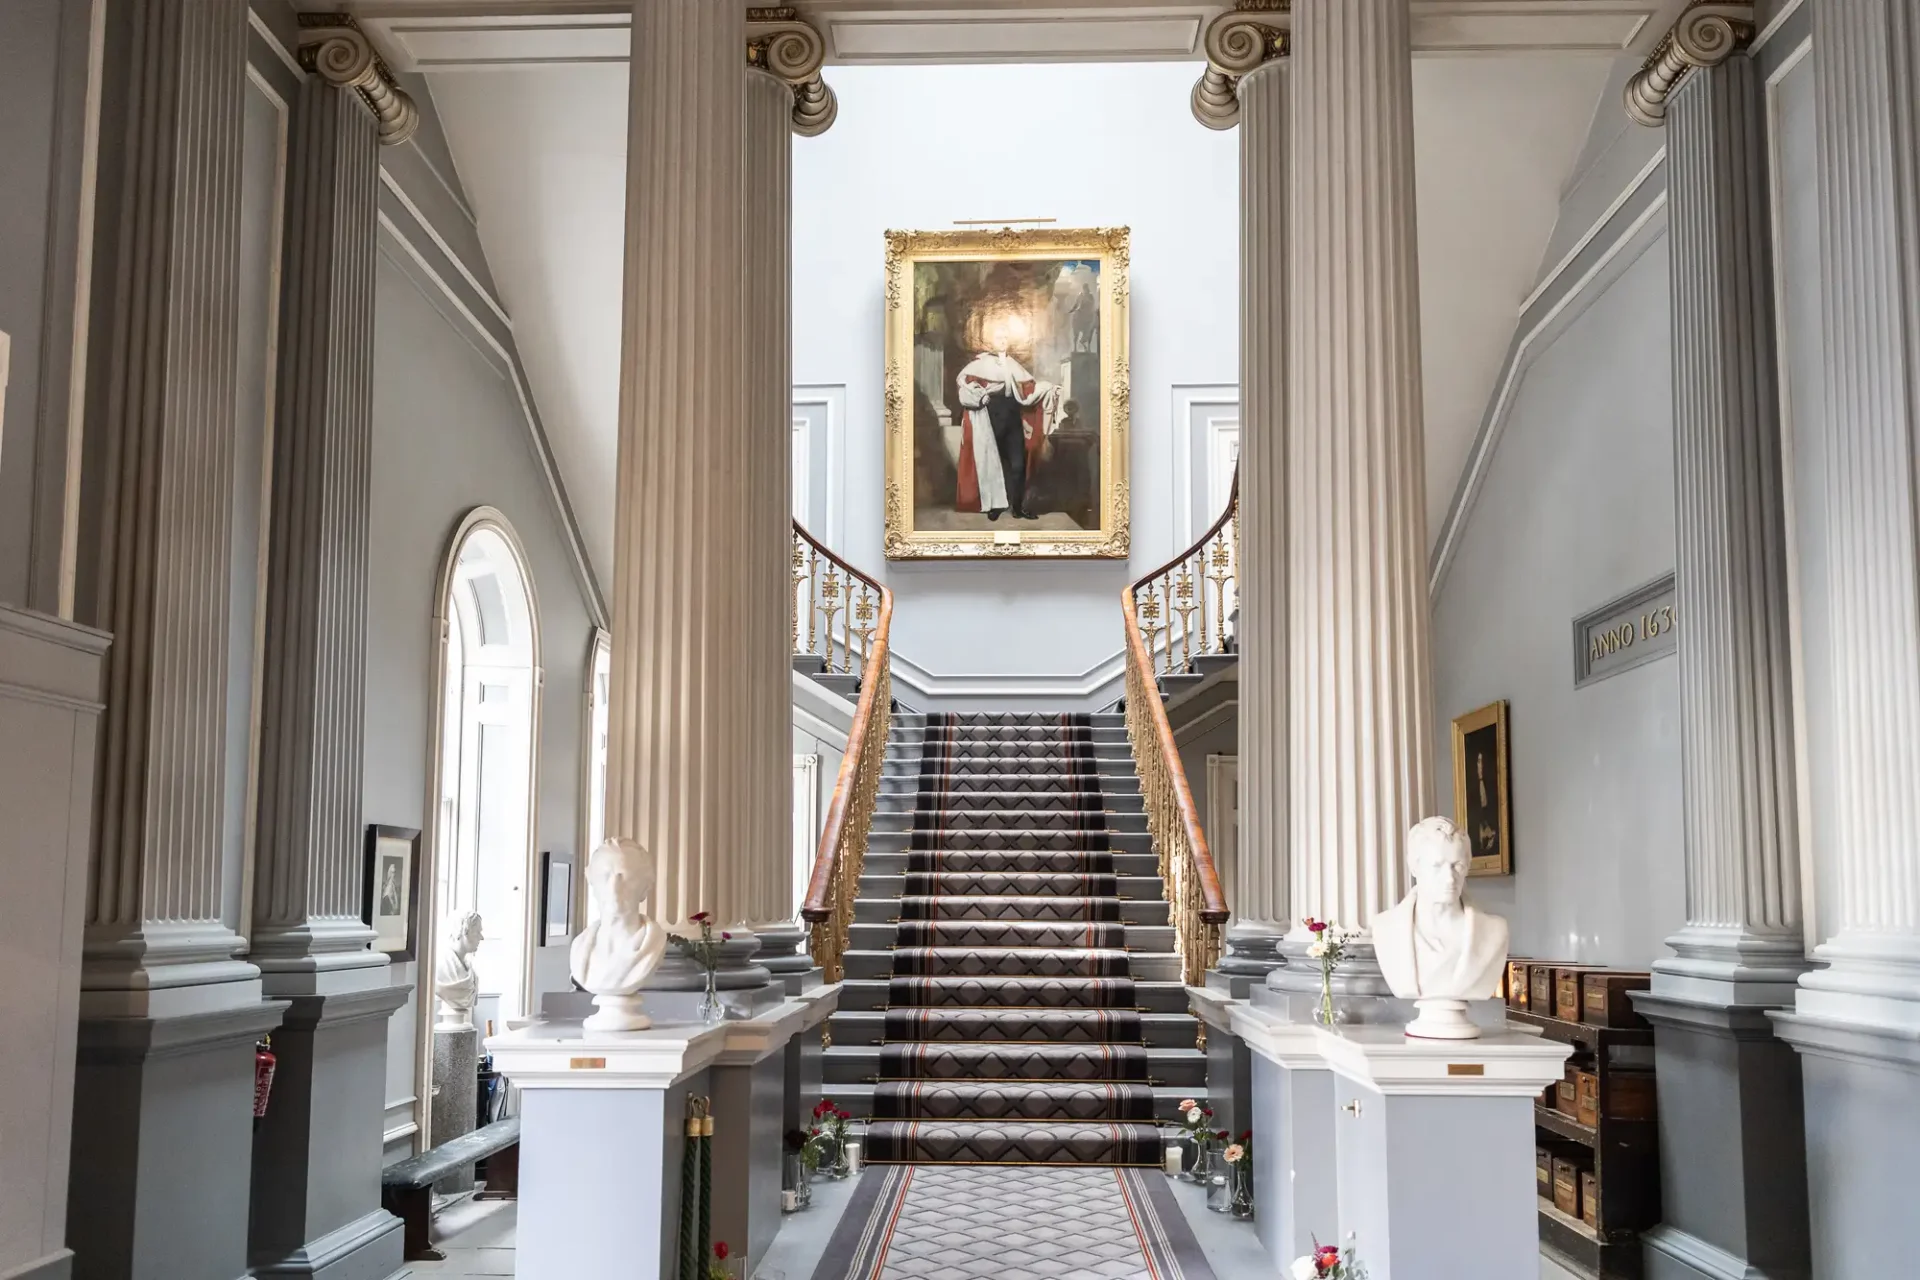 Elegant staircase in a grand hall flanked by classical columns and statues, with a large portrait hanging above.